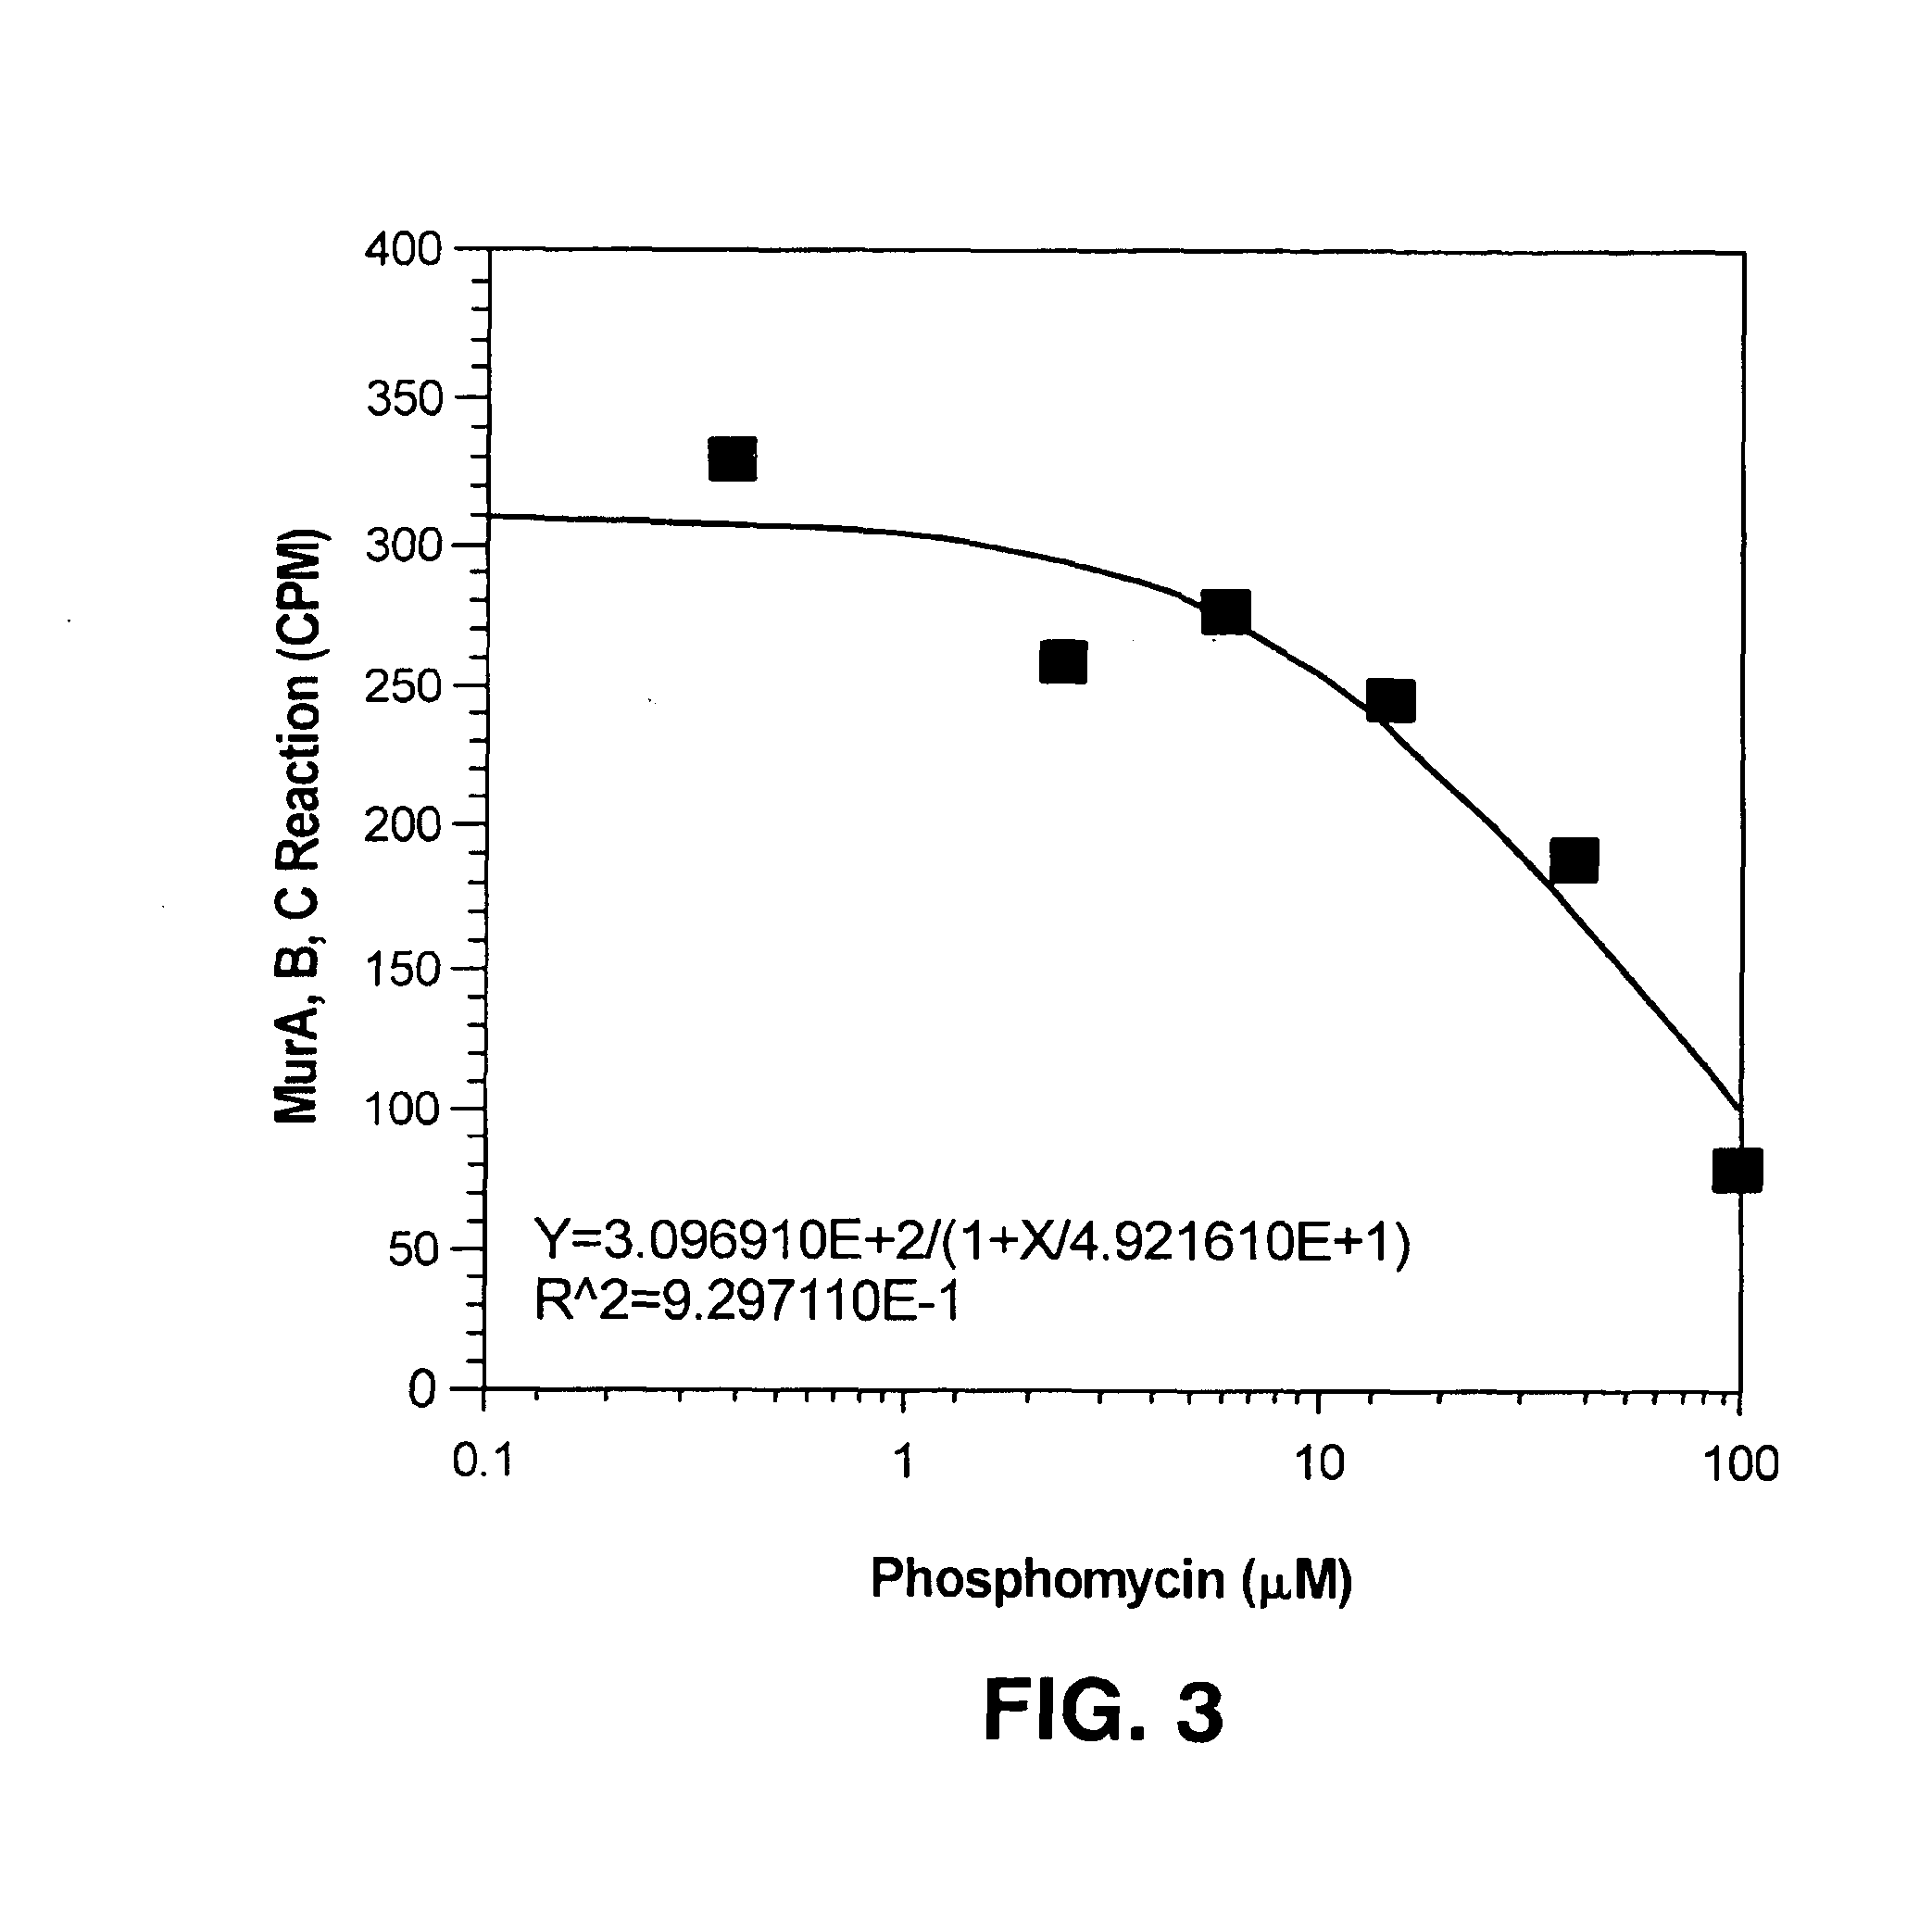 Direct adsorption scintillation assay for measuring enzyme activity and assaying biochemical processes